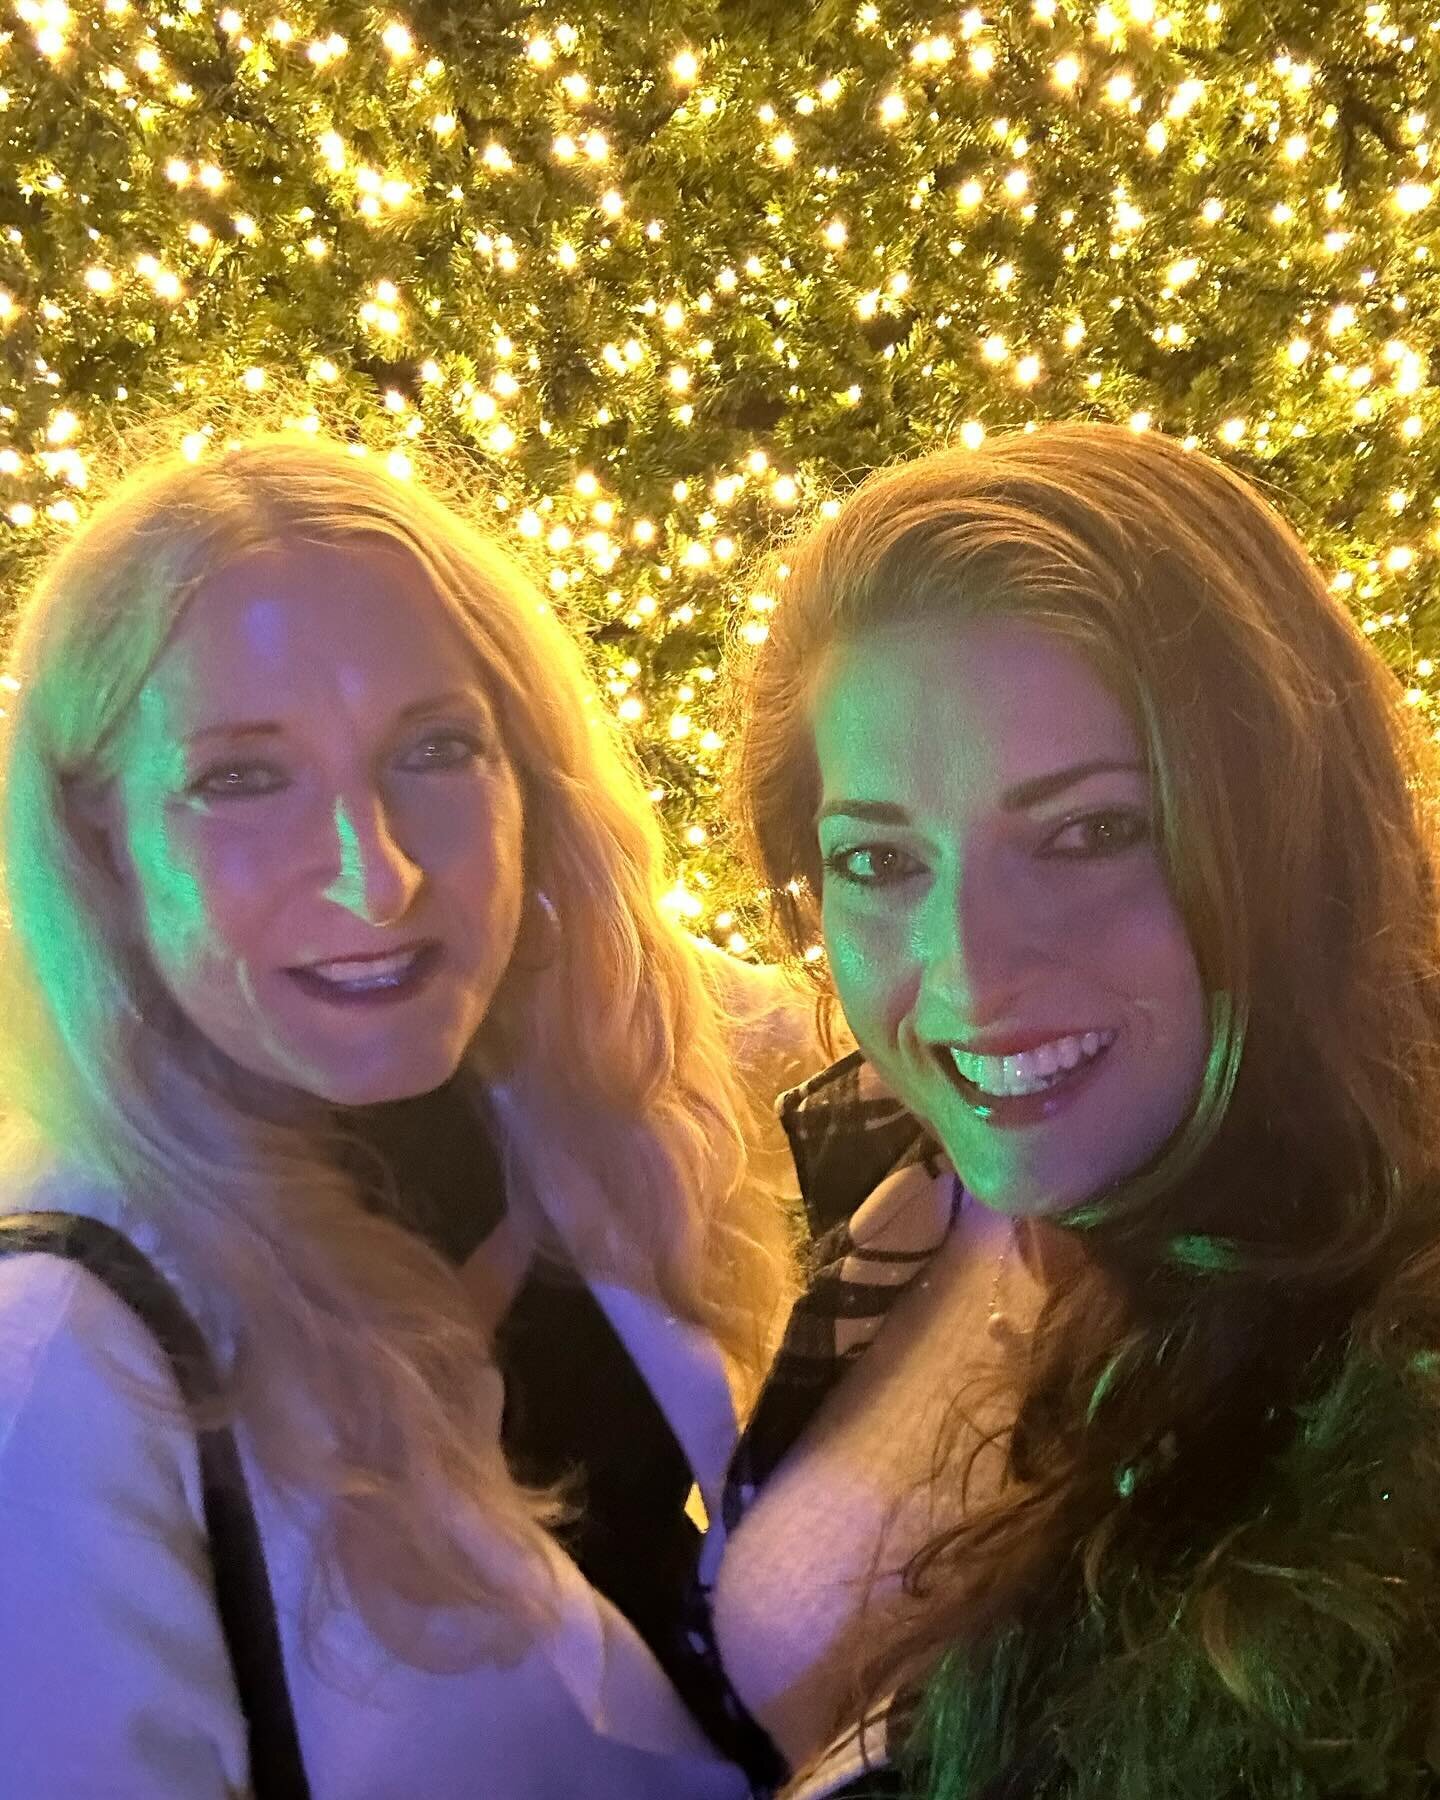 What a perfect way to welcome December (my most favorite month) by going to the Franklin Christmas tree lighting with my sweet momma last night! 🎄

#holidayvibes #christmastime #treelighting #december